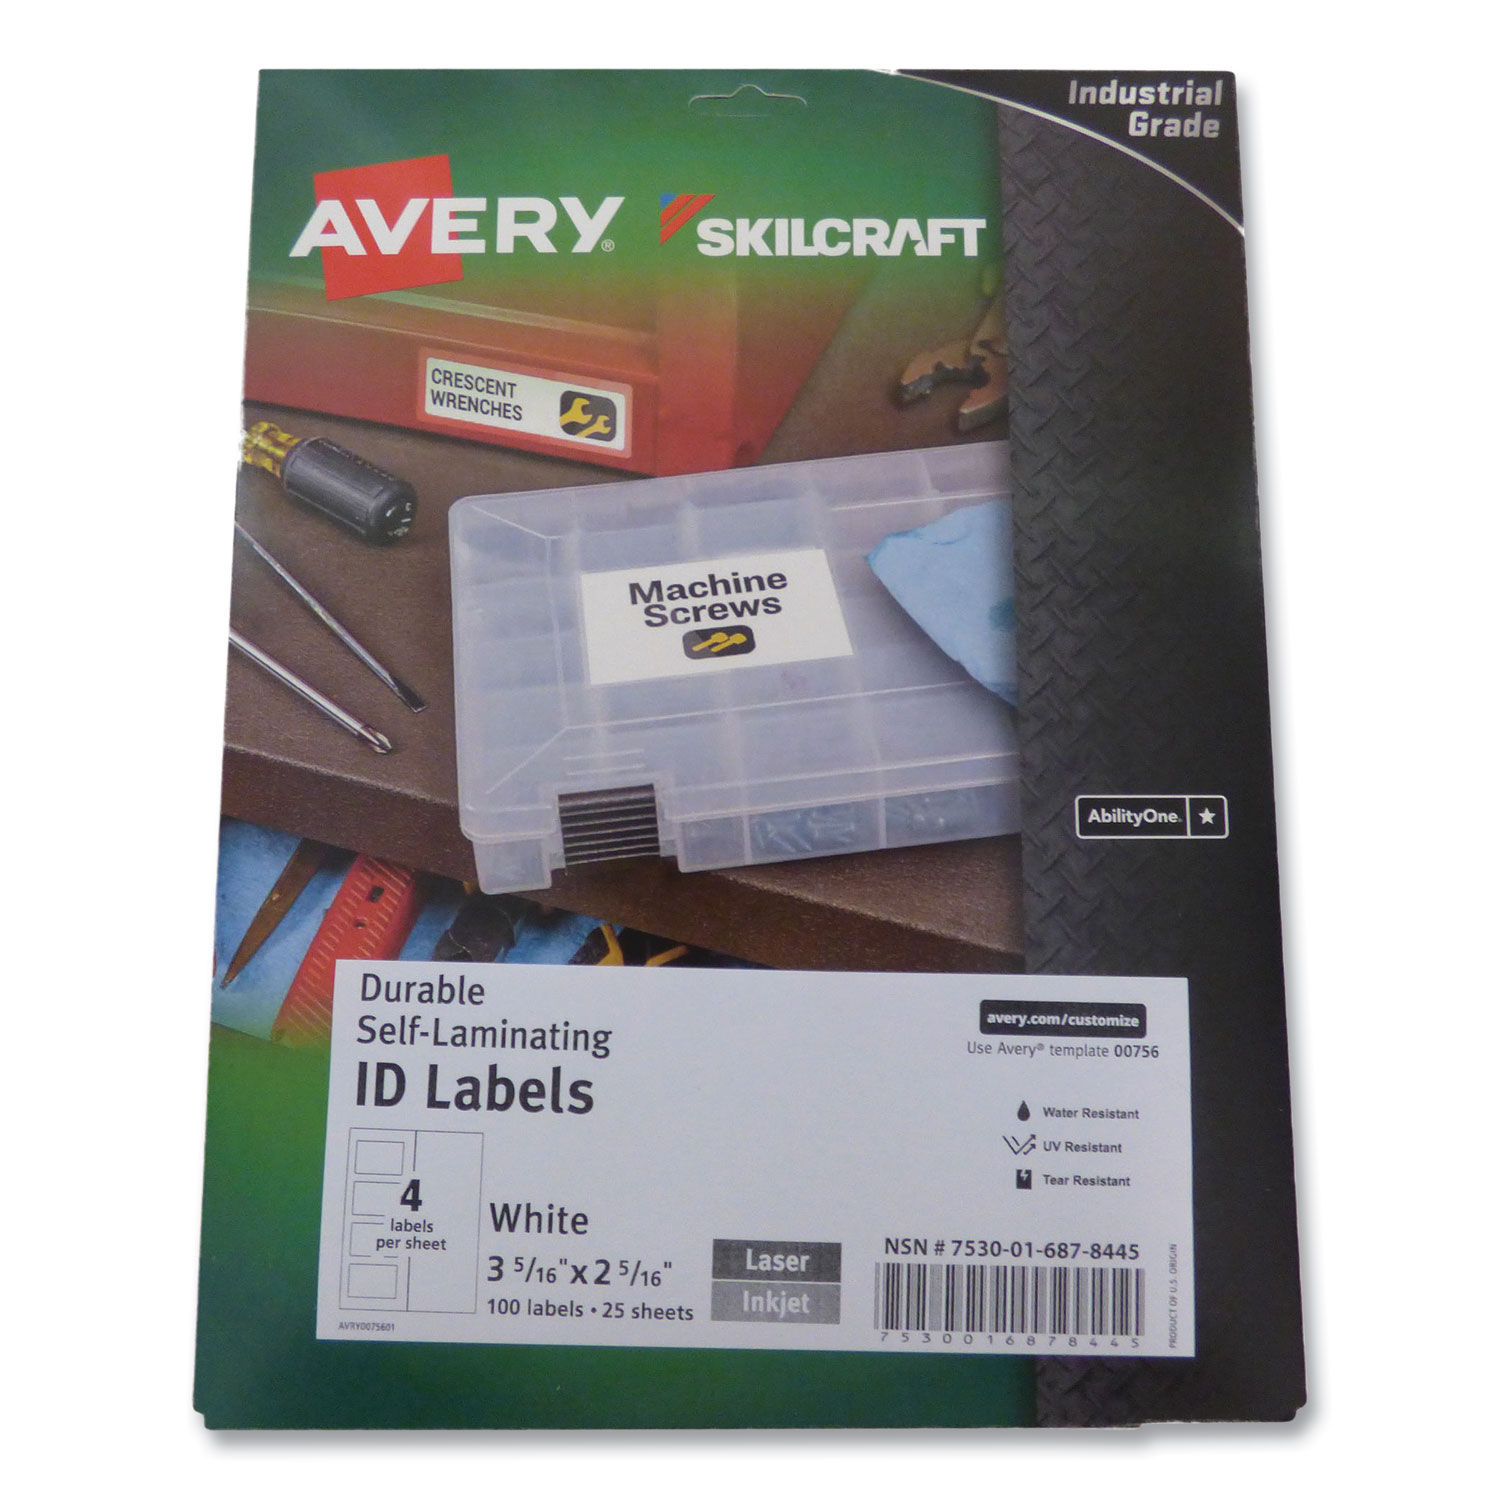 Avery Easy Align Self-Laminating ID Labels